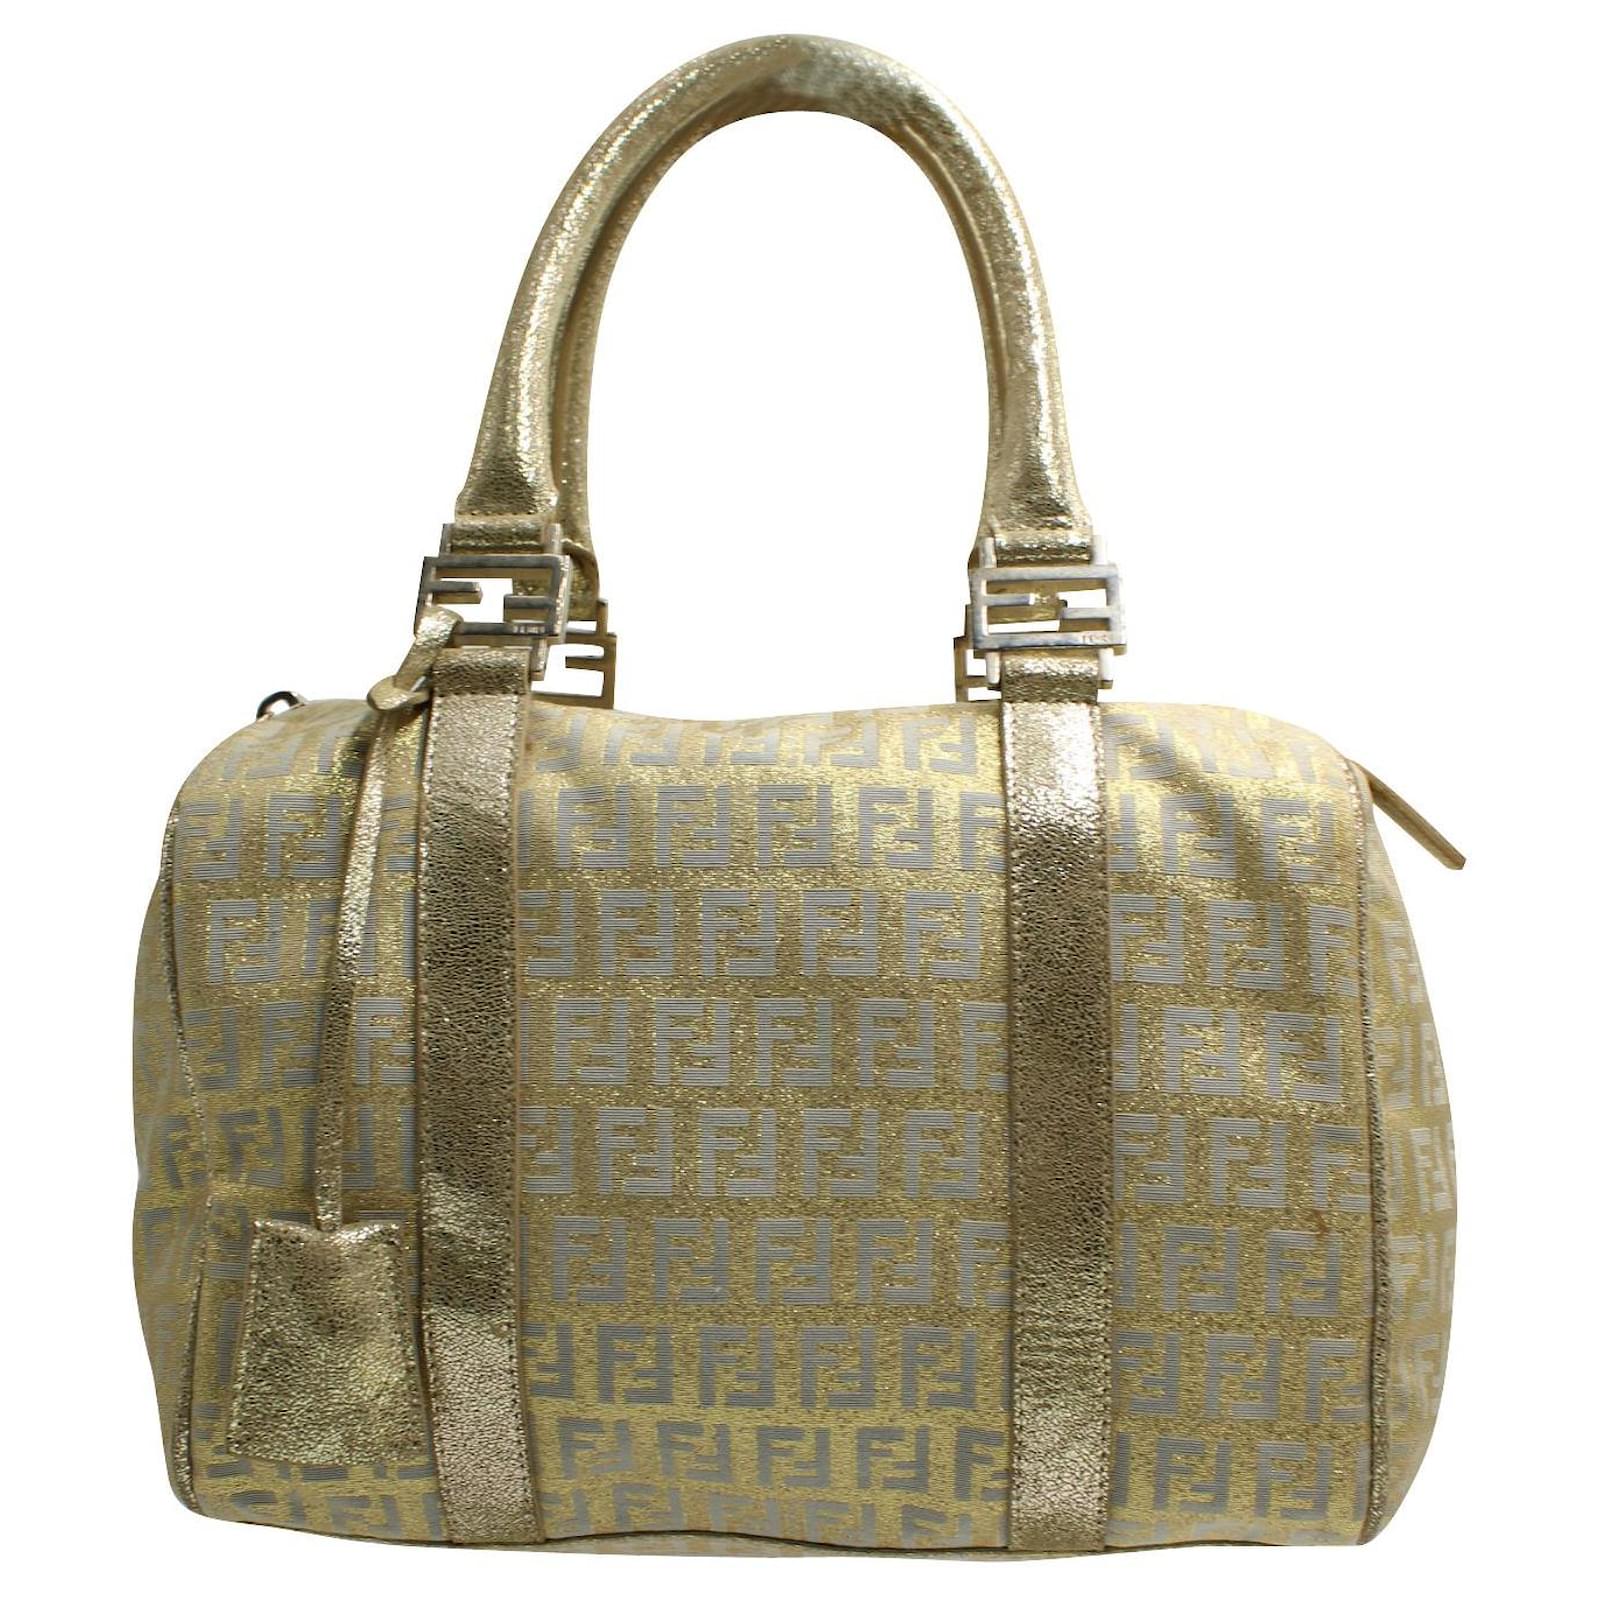 Fendi Brown/Beige Zucchino Canvas and Leather Forever Bauletto